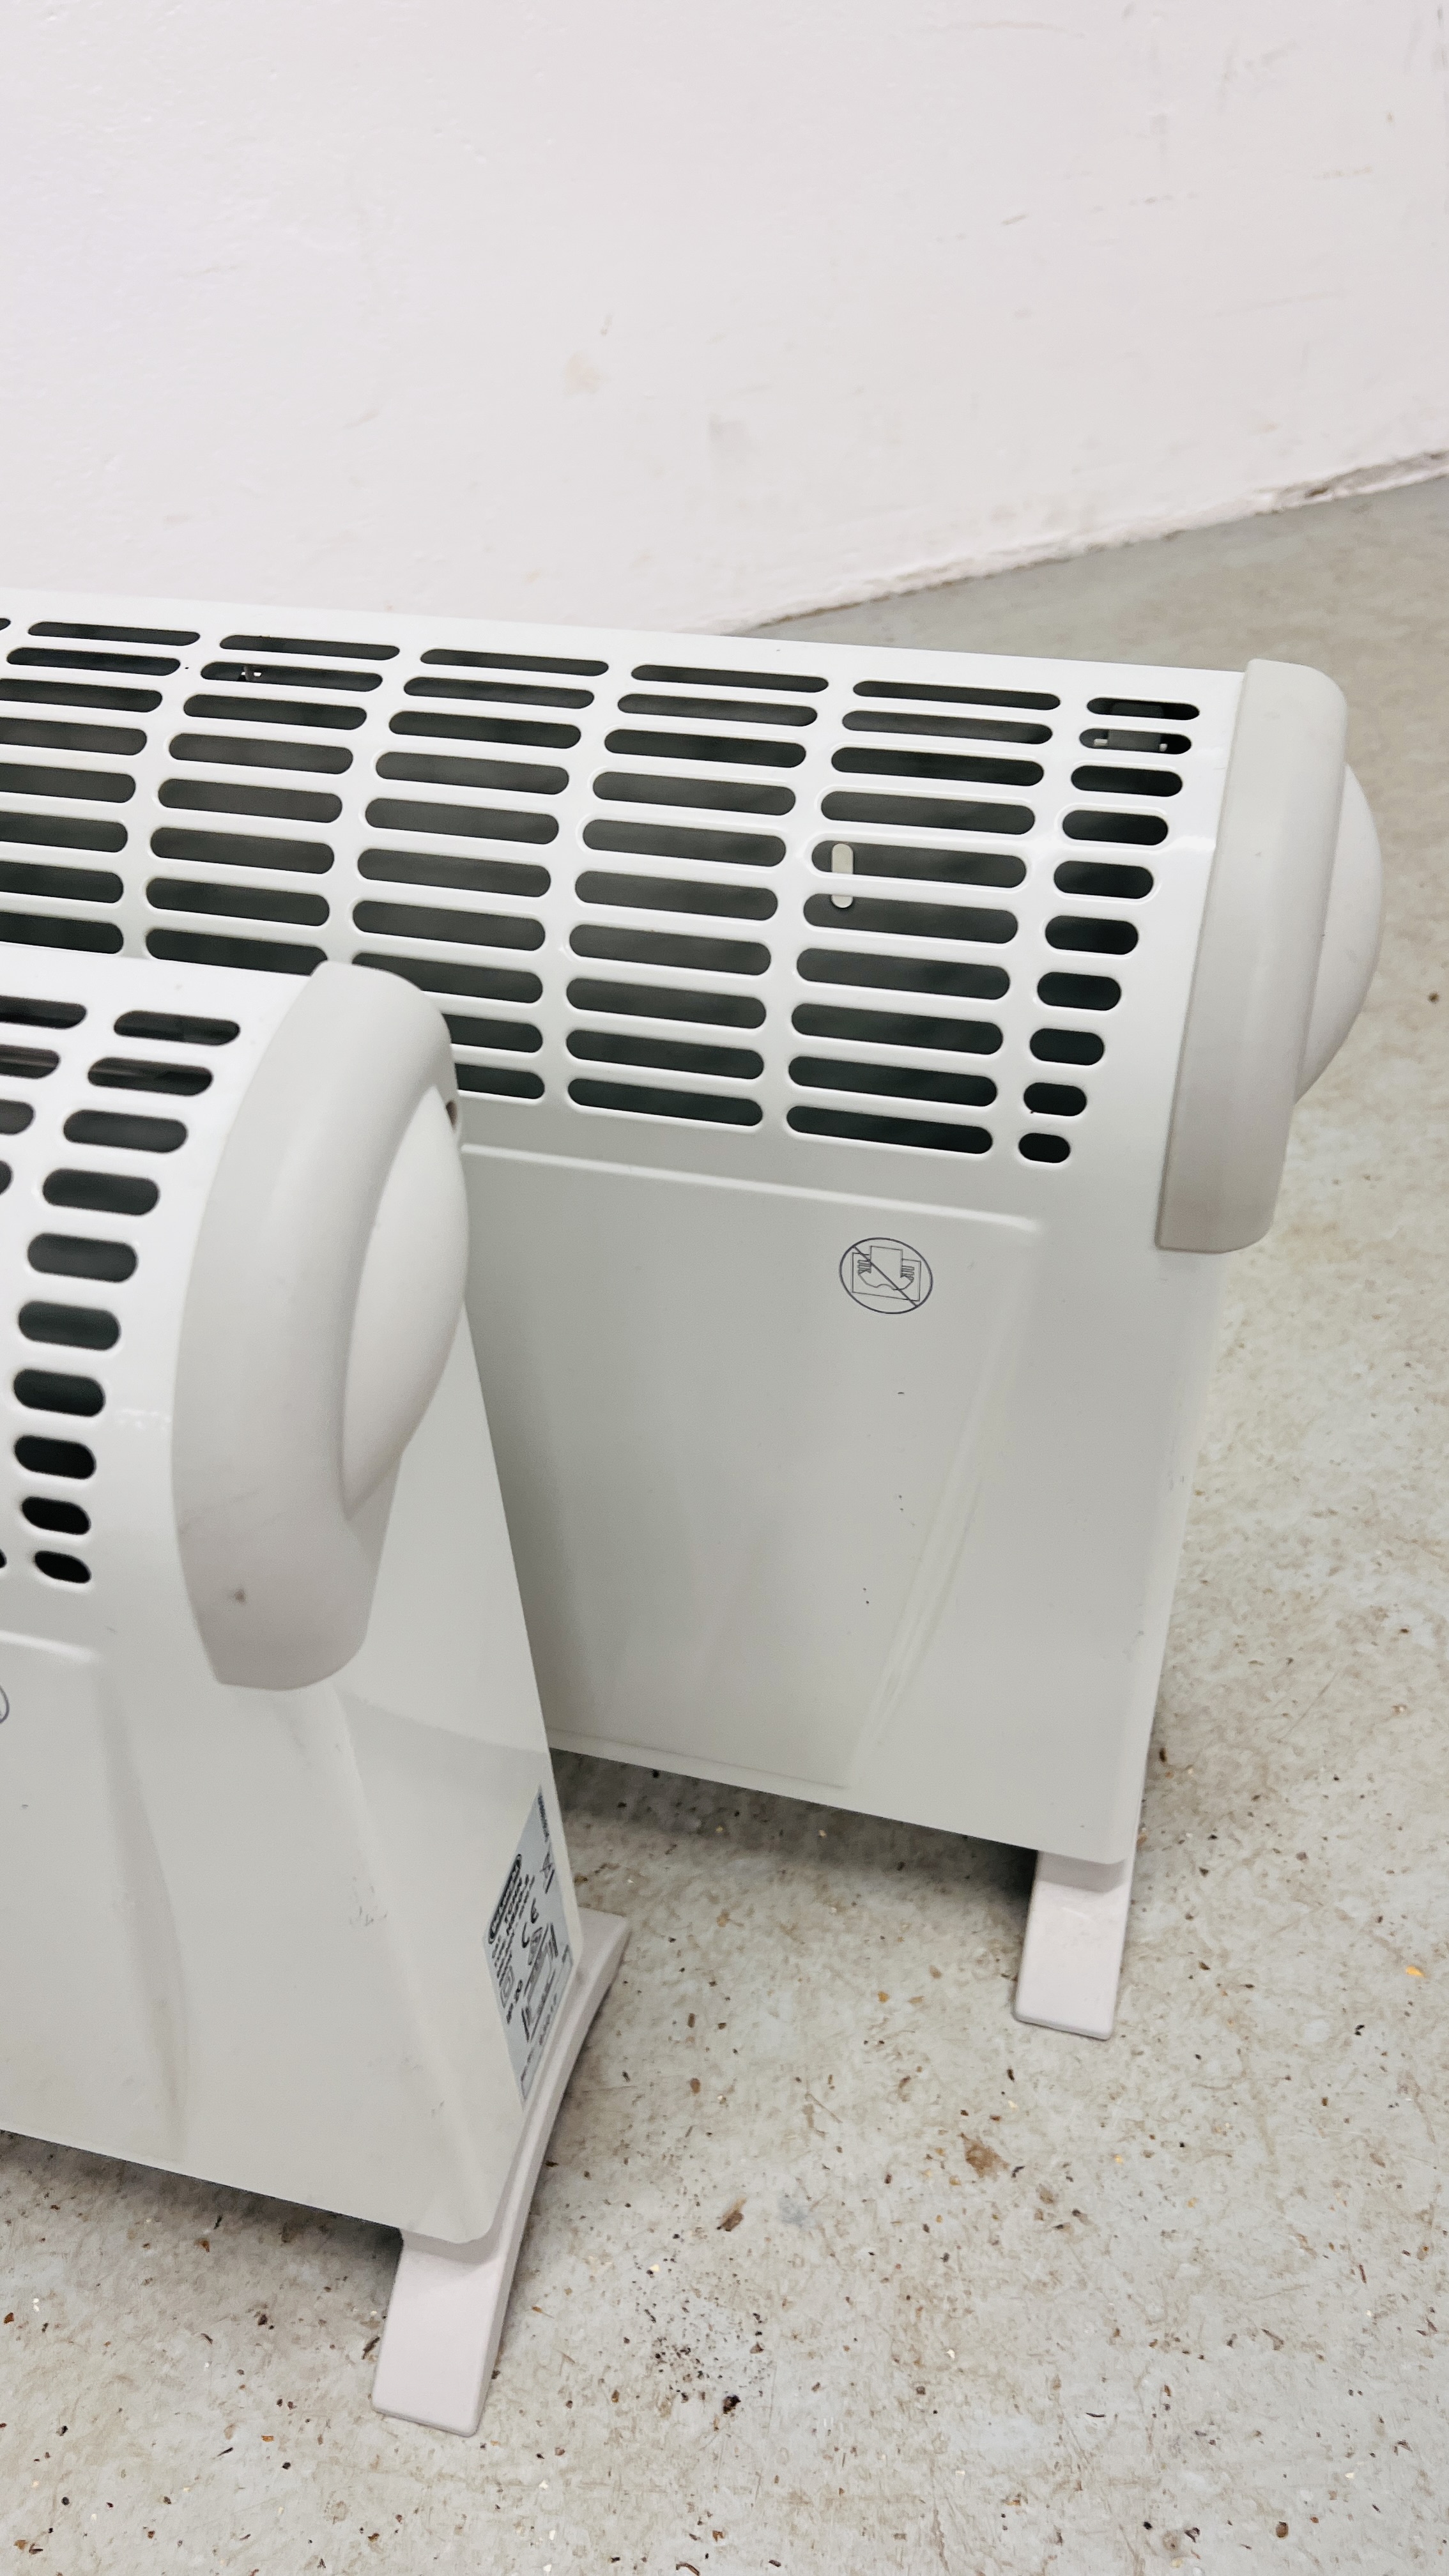 TWO DELONGHI ELECTRIC CONVECTOR HEATERS - SOLD AS SEEN - Image 4 of 4